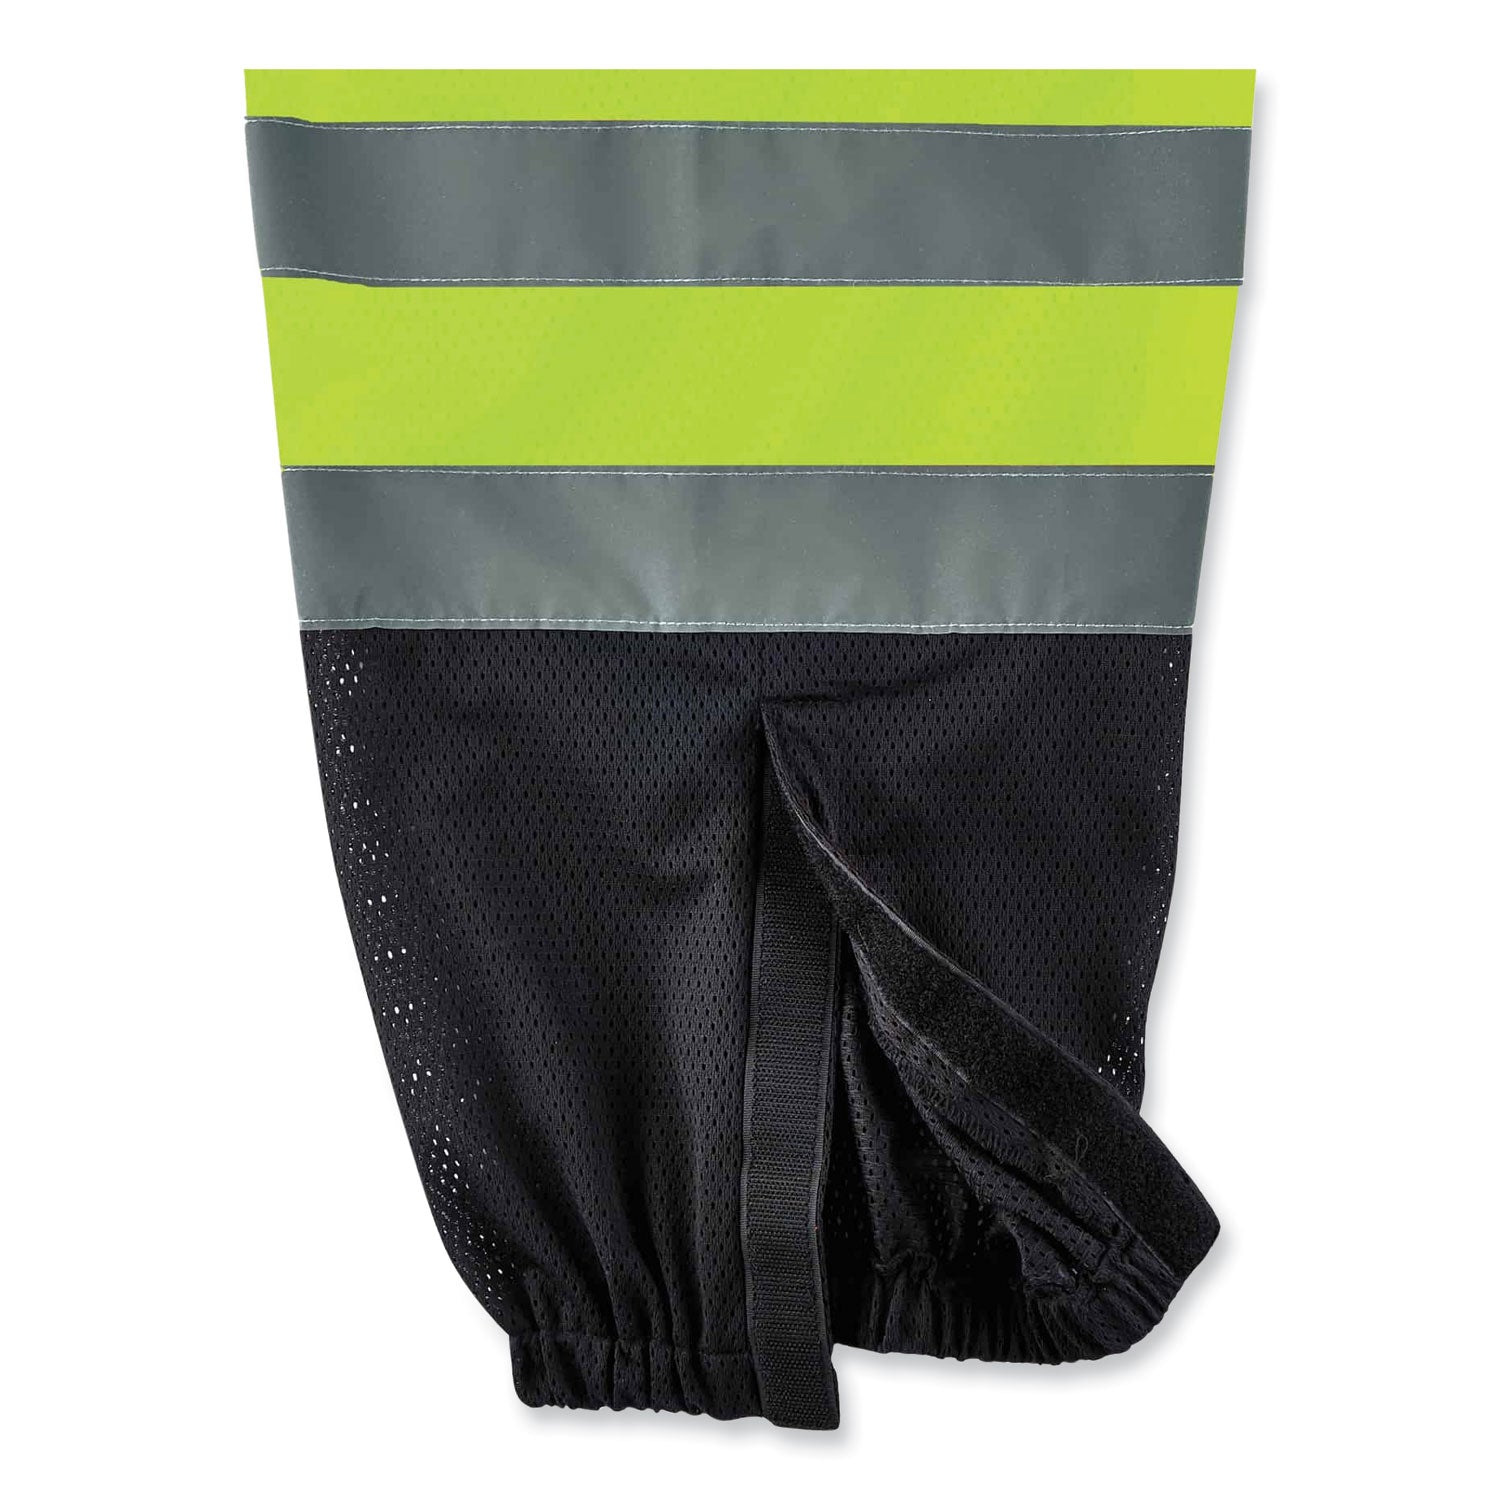 glowear-8910bk-class-e-hi-vis-pants-with-black-bottom-polyester-2x-large-3x-large-lime-ships-in-1-3-business-days_ego23957 - 3